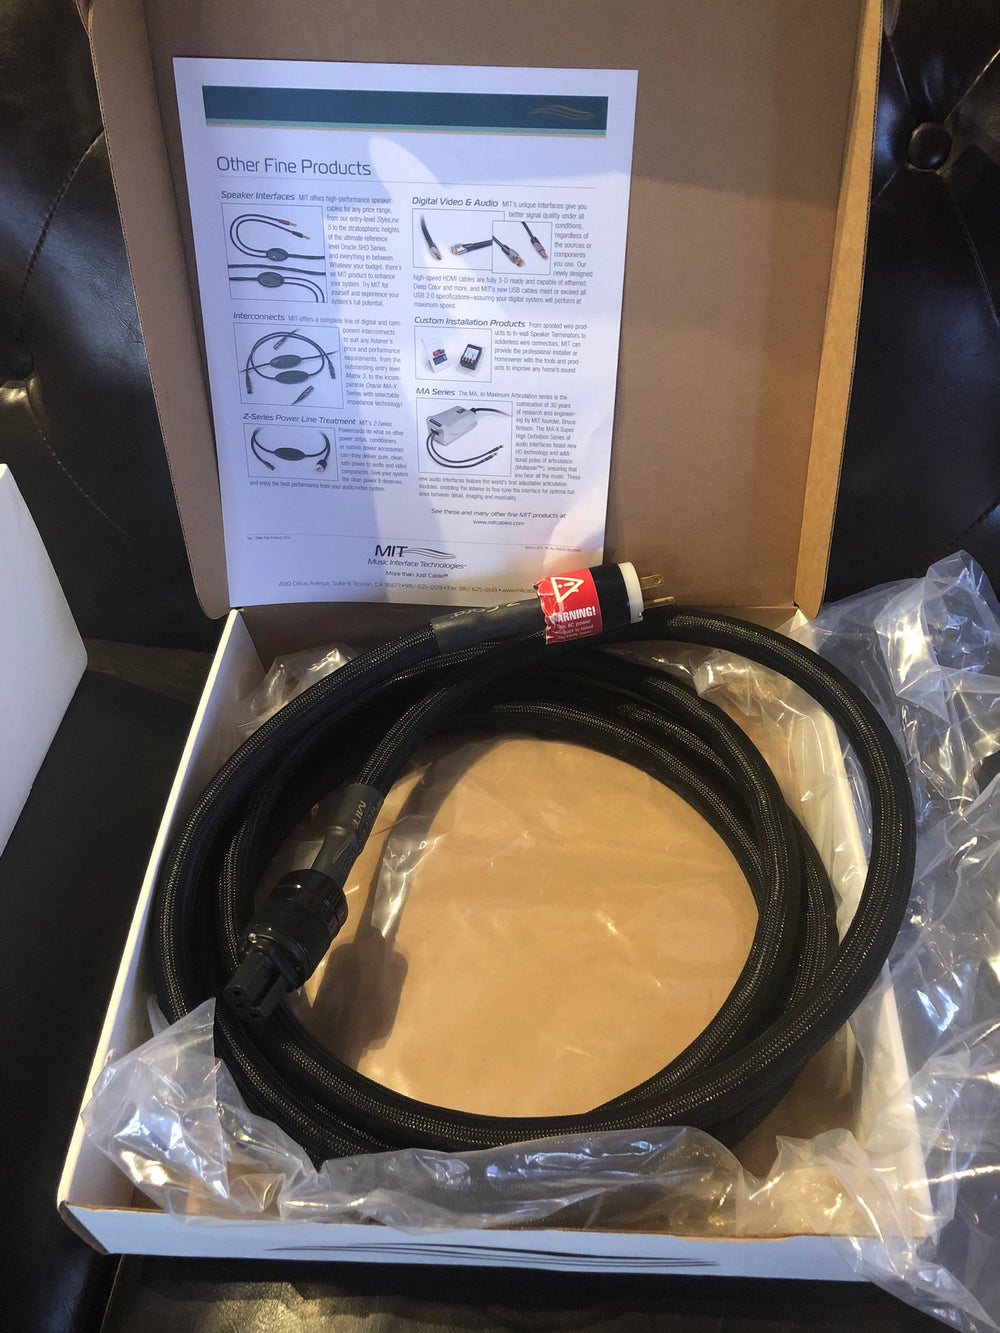 MIT Oracle Z-Cord Reference Power Cord with 4 meters [Previously Owned]